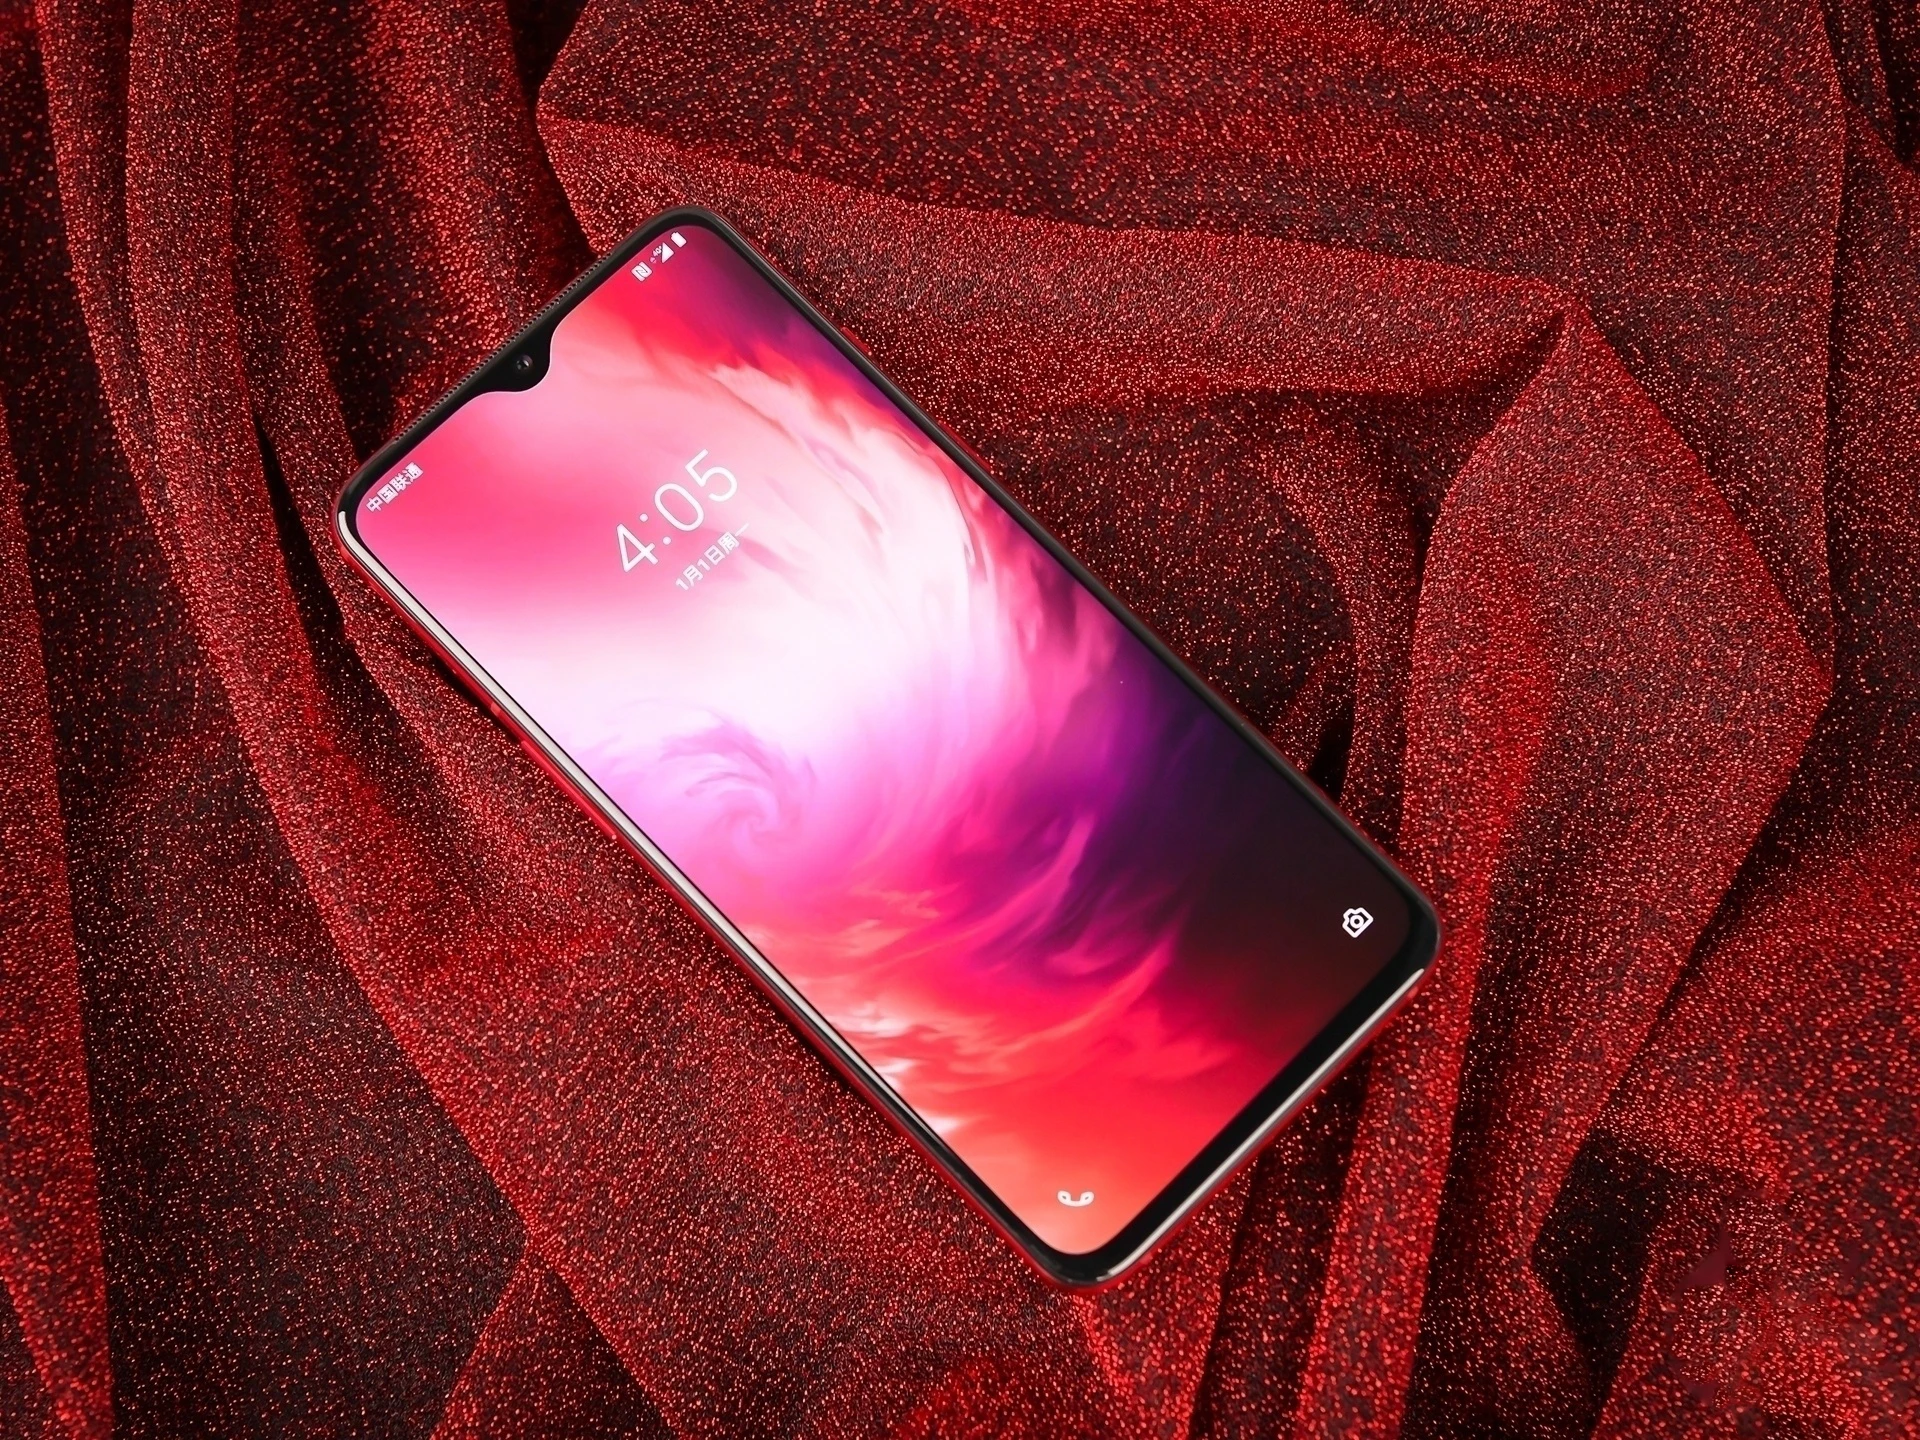 oneplus nord cellphones Original New Oneplus 7 8GB 256GB Mobile Phone 6.41"Octa Core Snapdragon 855 3700mAh 48MP+16MP Cameras 1080x2340 pixels phone oneplus nord top model